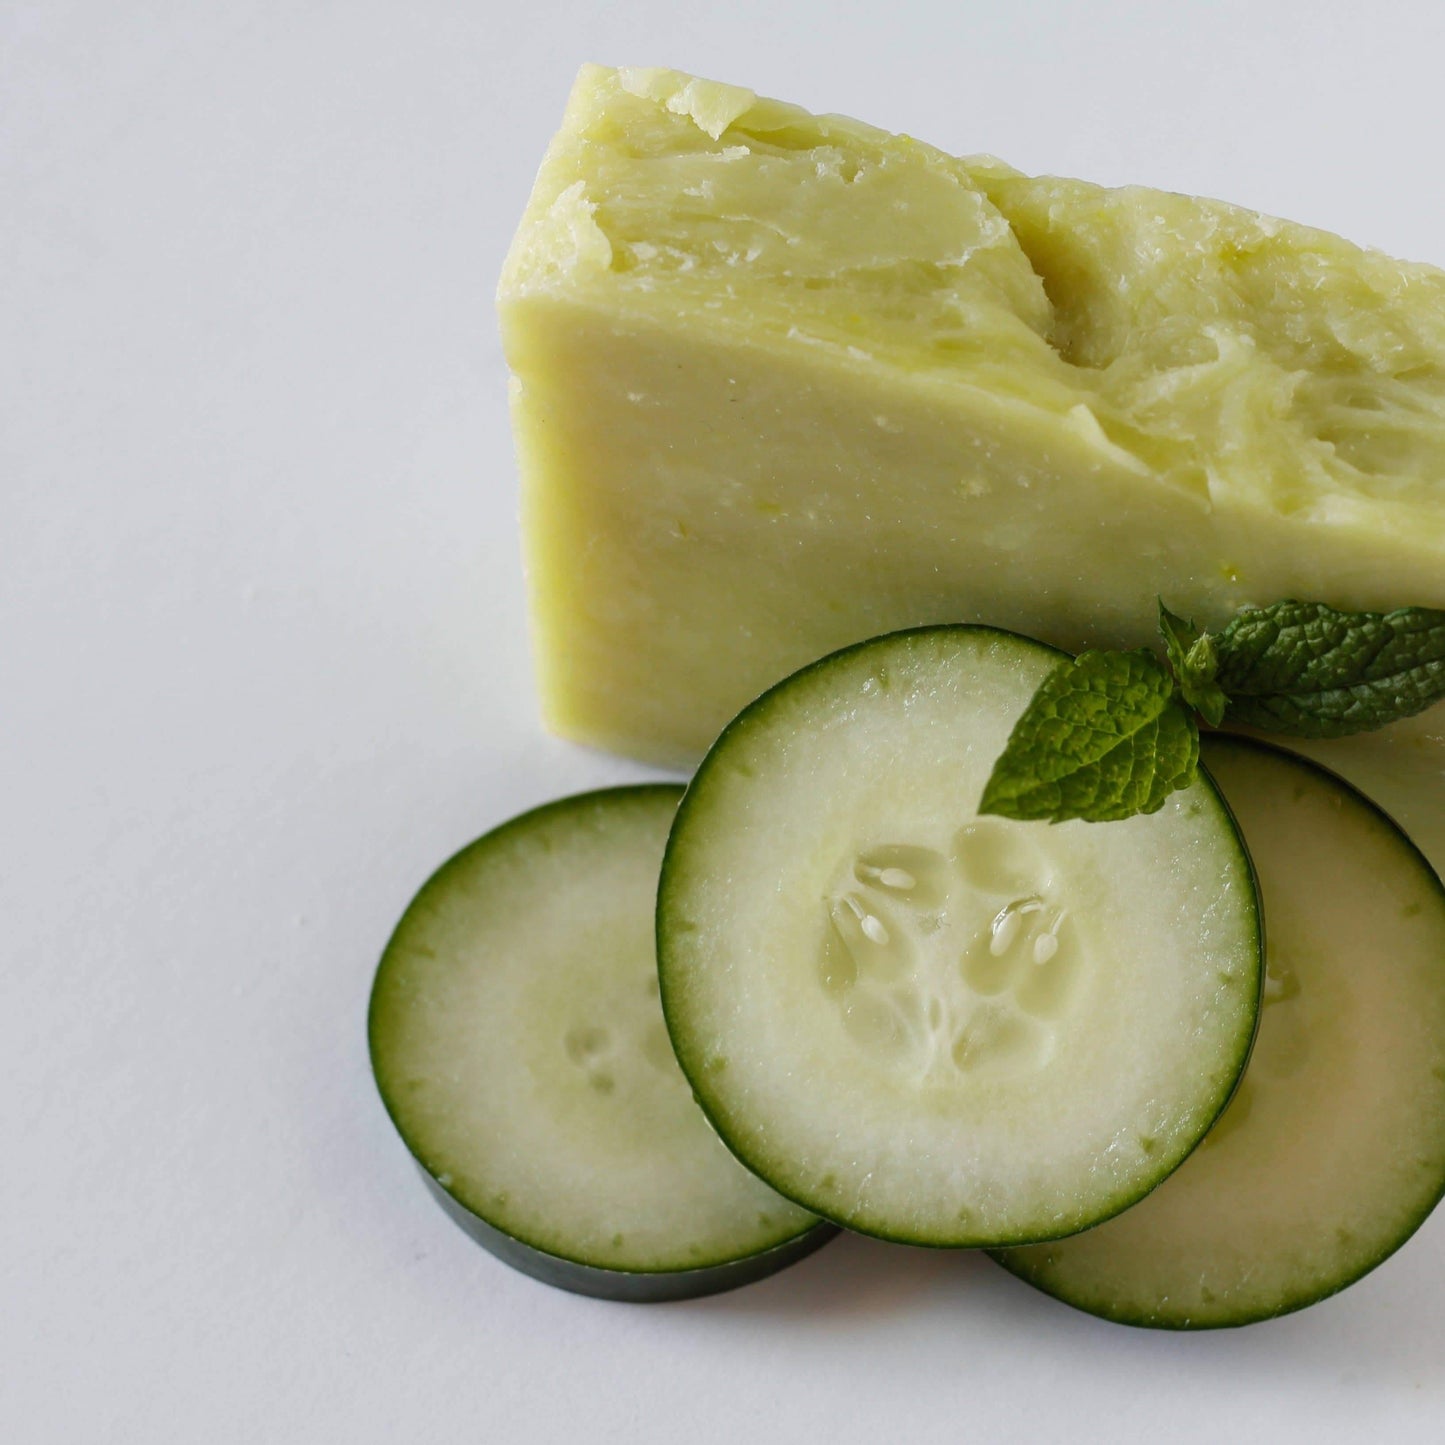 Light green soap bar on a white background decorated with cucumber slices and spearmint leaves.